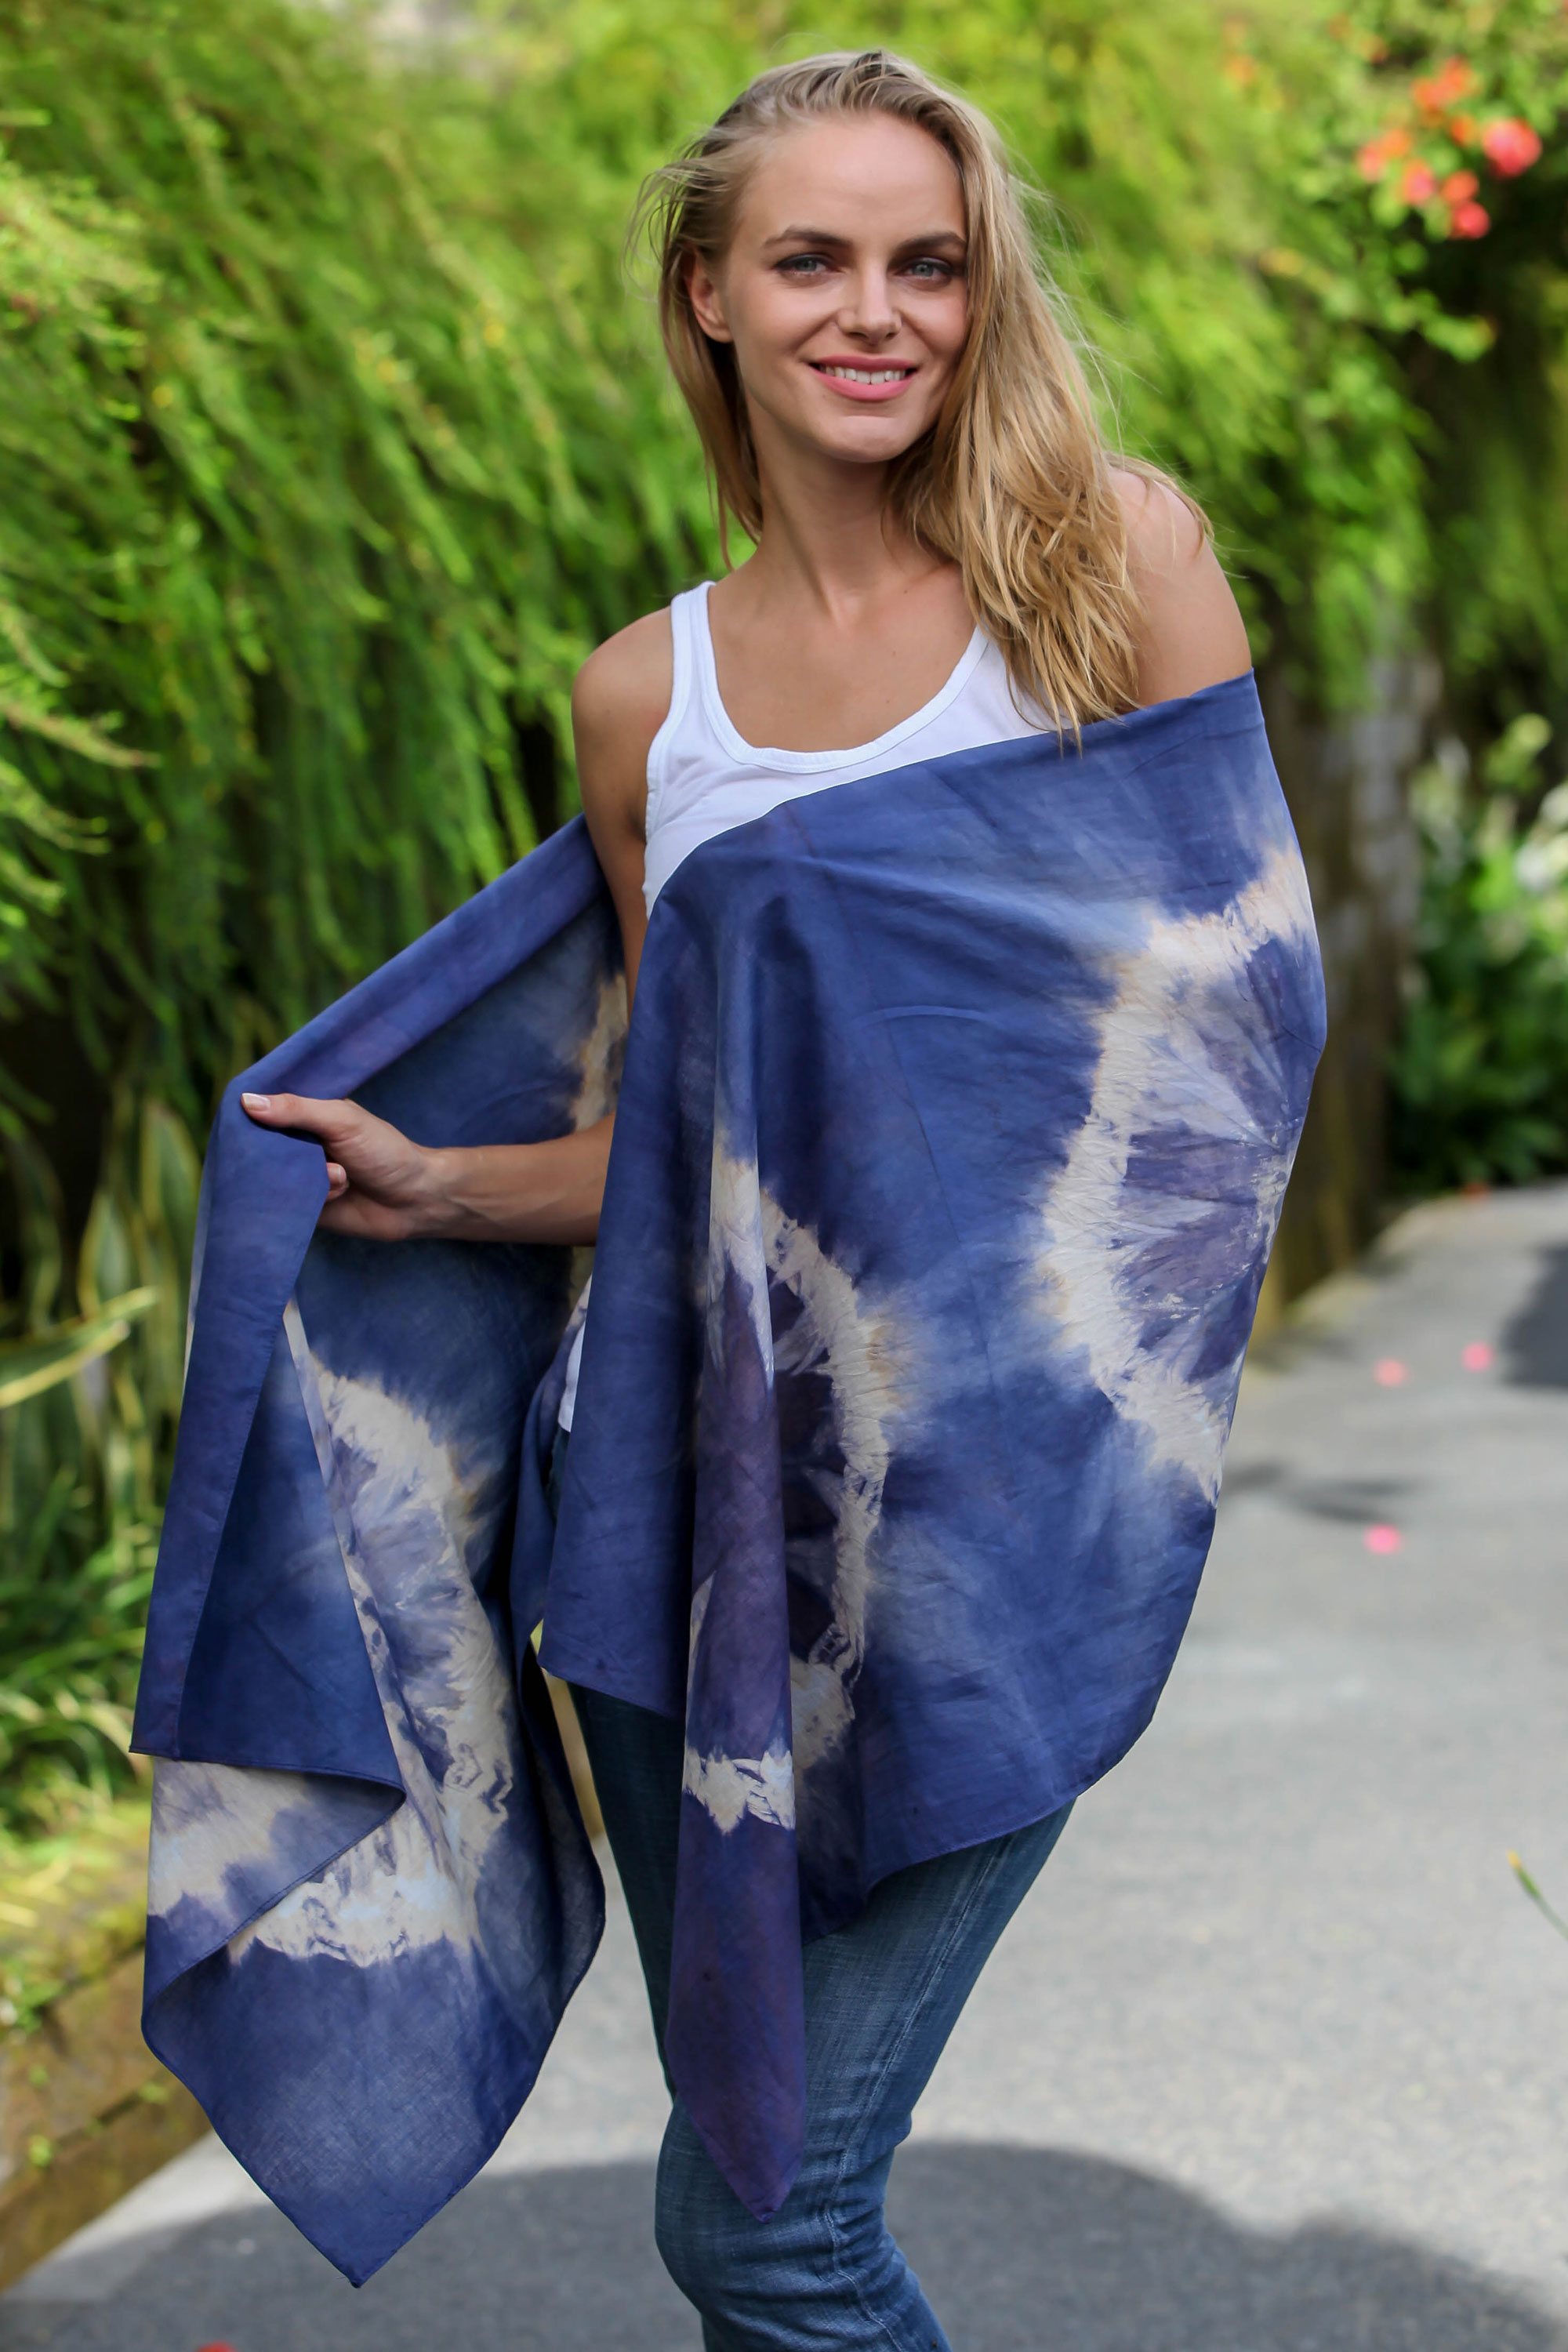 Tie-Dye Cotton Shawl in Ecru and Indigo from Indonesia scarves and shawls